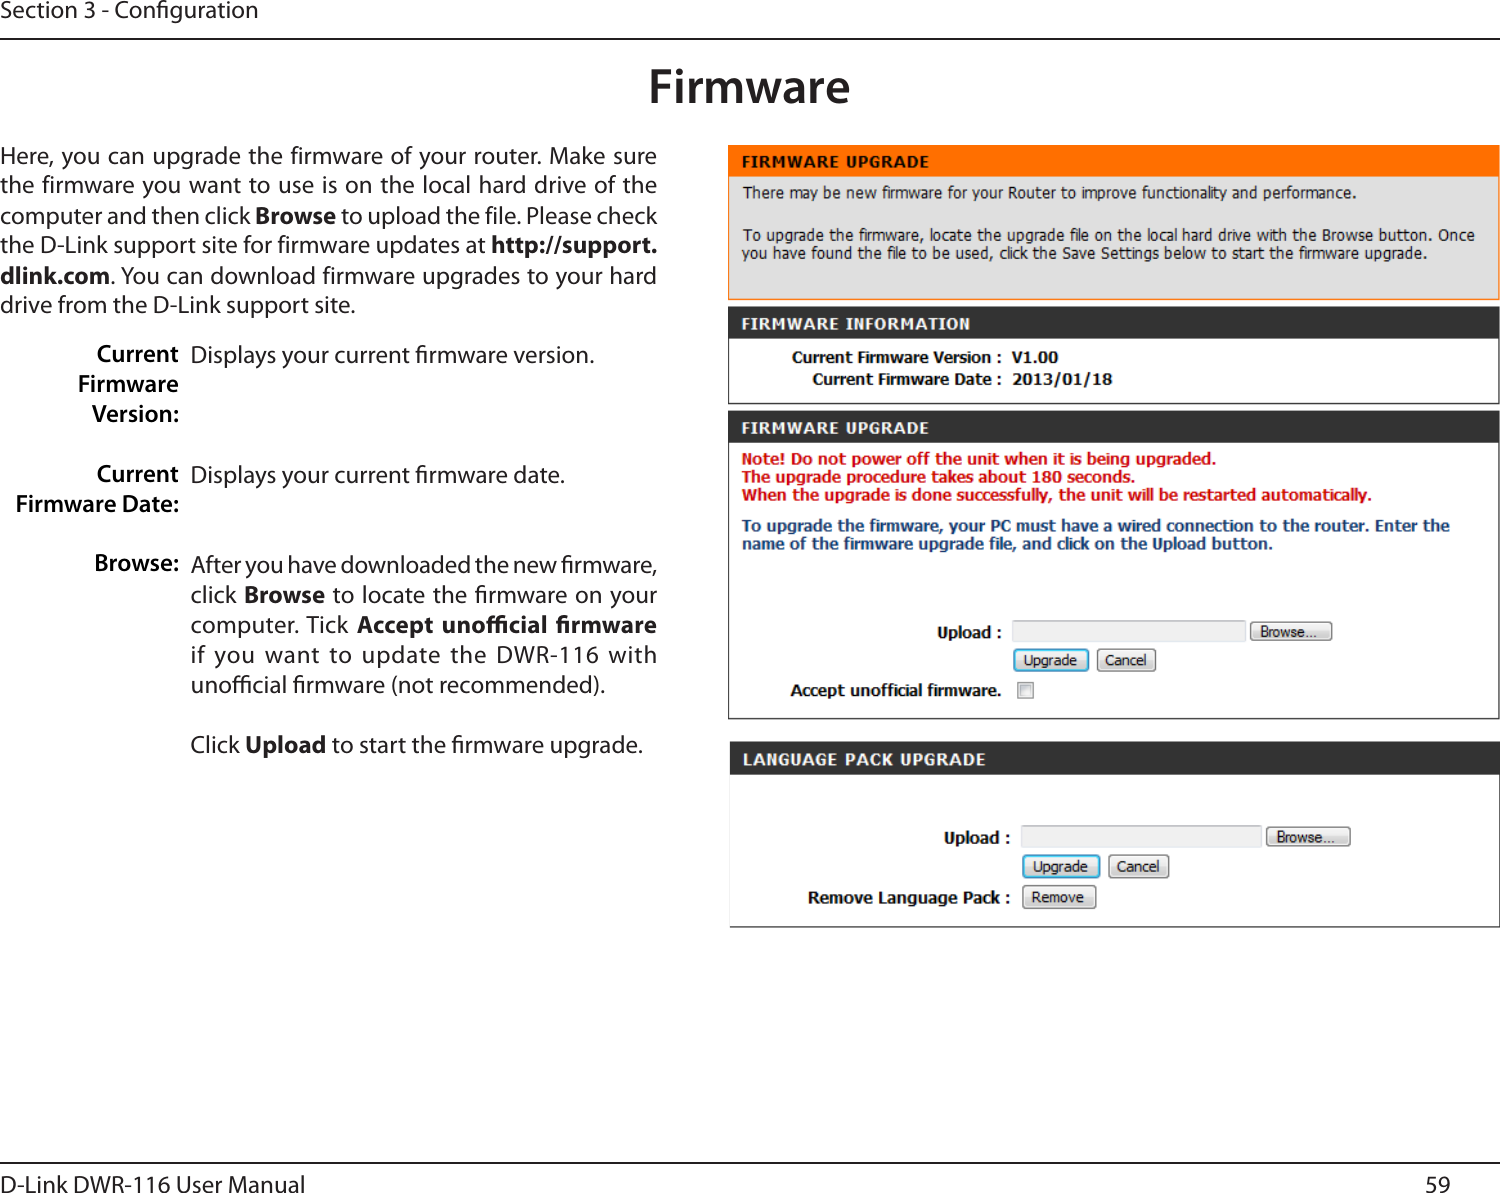 59D-Link DWR-116 User ManualSection 3 - CongurationFirmwareDisplays your current rmware version.Displays your current rmware date.After you have downloaded the new rmware, click Browse to locate the rmware on your computer. Tick Accept  unocial  rmware if you want to update the  DWR-116 with unocial rmware (not recommended).Click Upload to start the rmware upgrade.Here, you can upgrade the firmware of your router. Make sure the firmware you want to use is on the local hard drive of the computer and then click Browse to upload the file. Please check the D-Link support site for firmware updates at http://support.dlink.com. You can download firmware upgrades to your hard drive from the D-Link support site.Current Firmware Version:Current  Firmware Date:Browse: